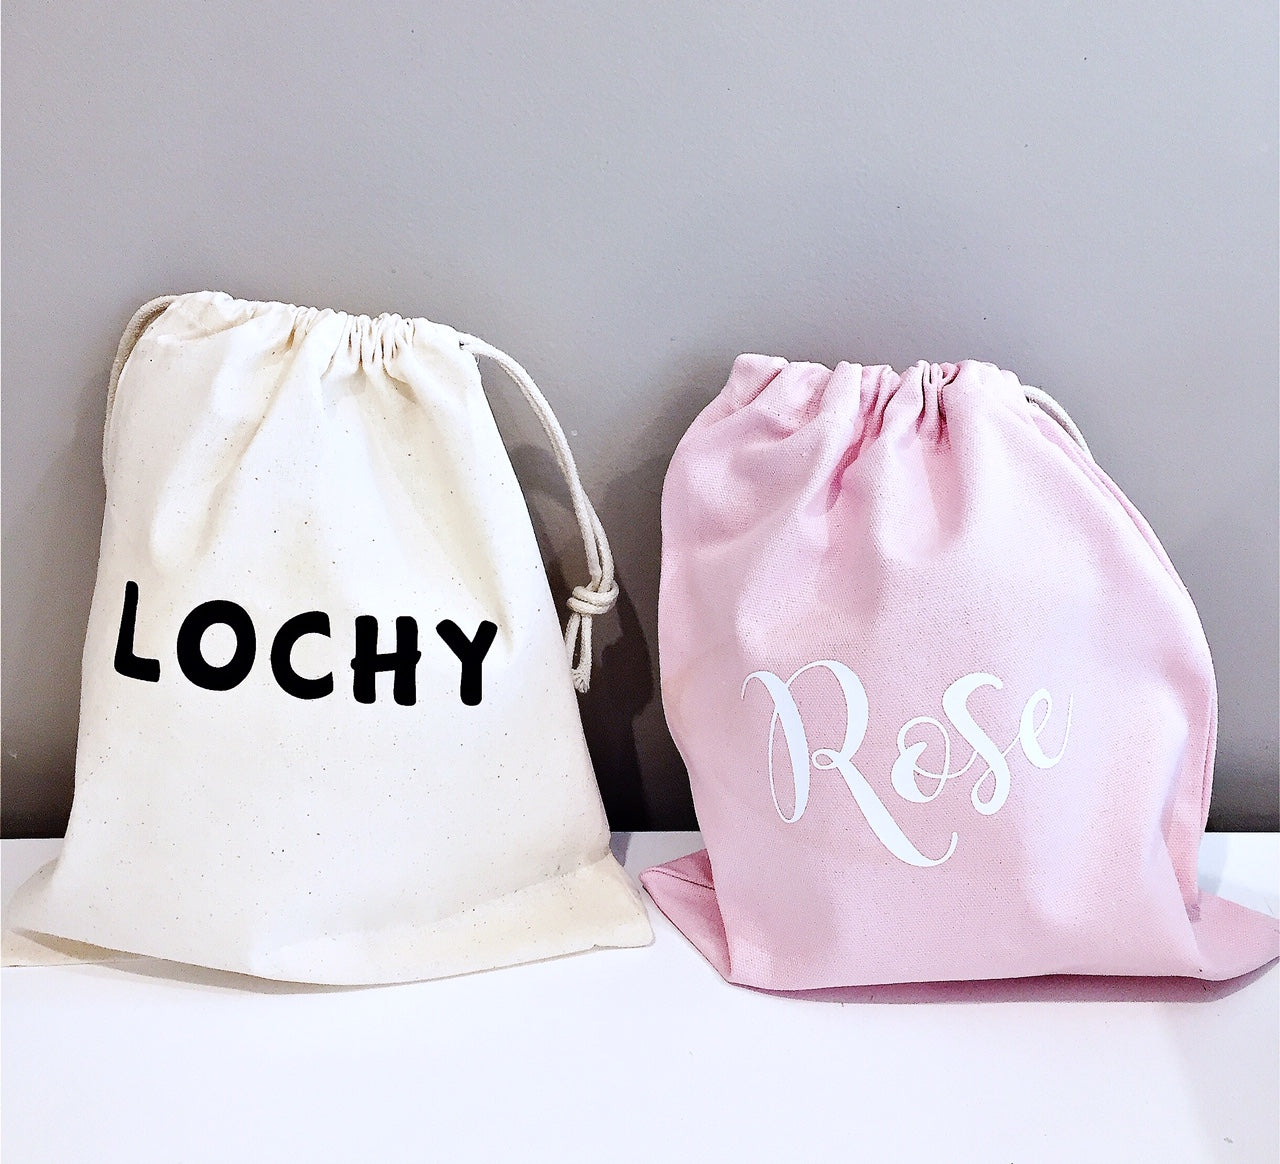 Personalised cotton gift bags